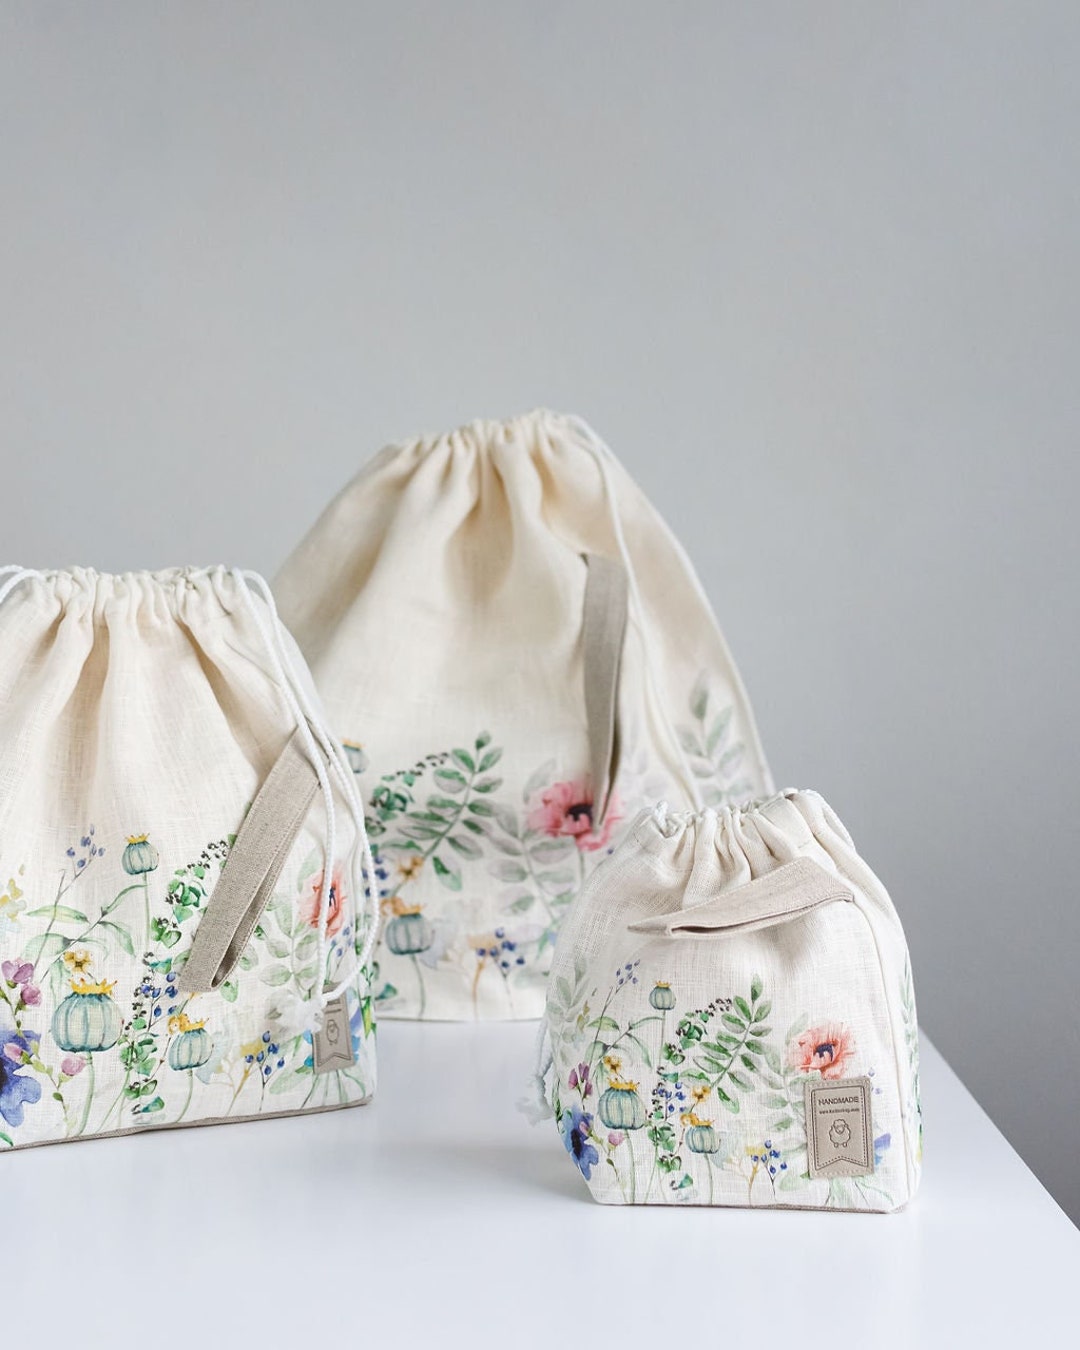 Set of 3 Meadow Print Knitter Project Bags. XL, Large and Small. - Etsy